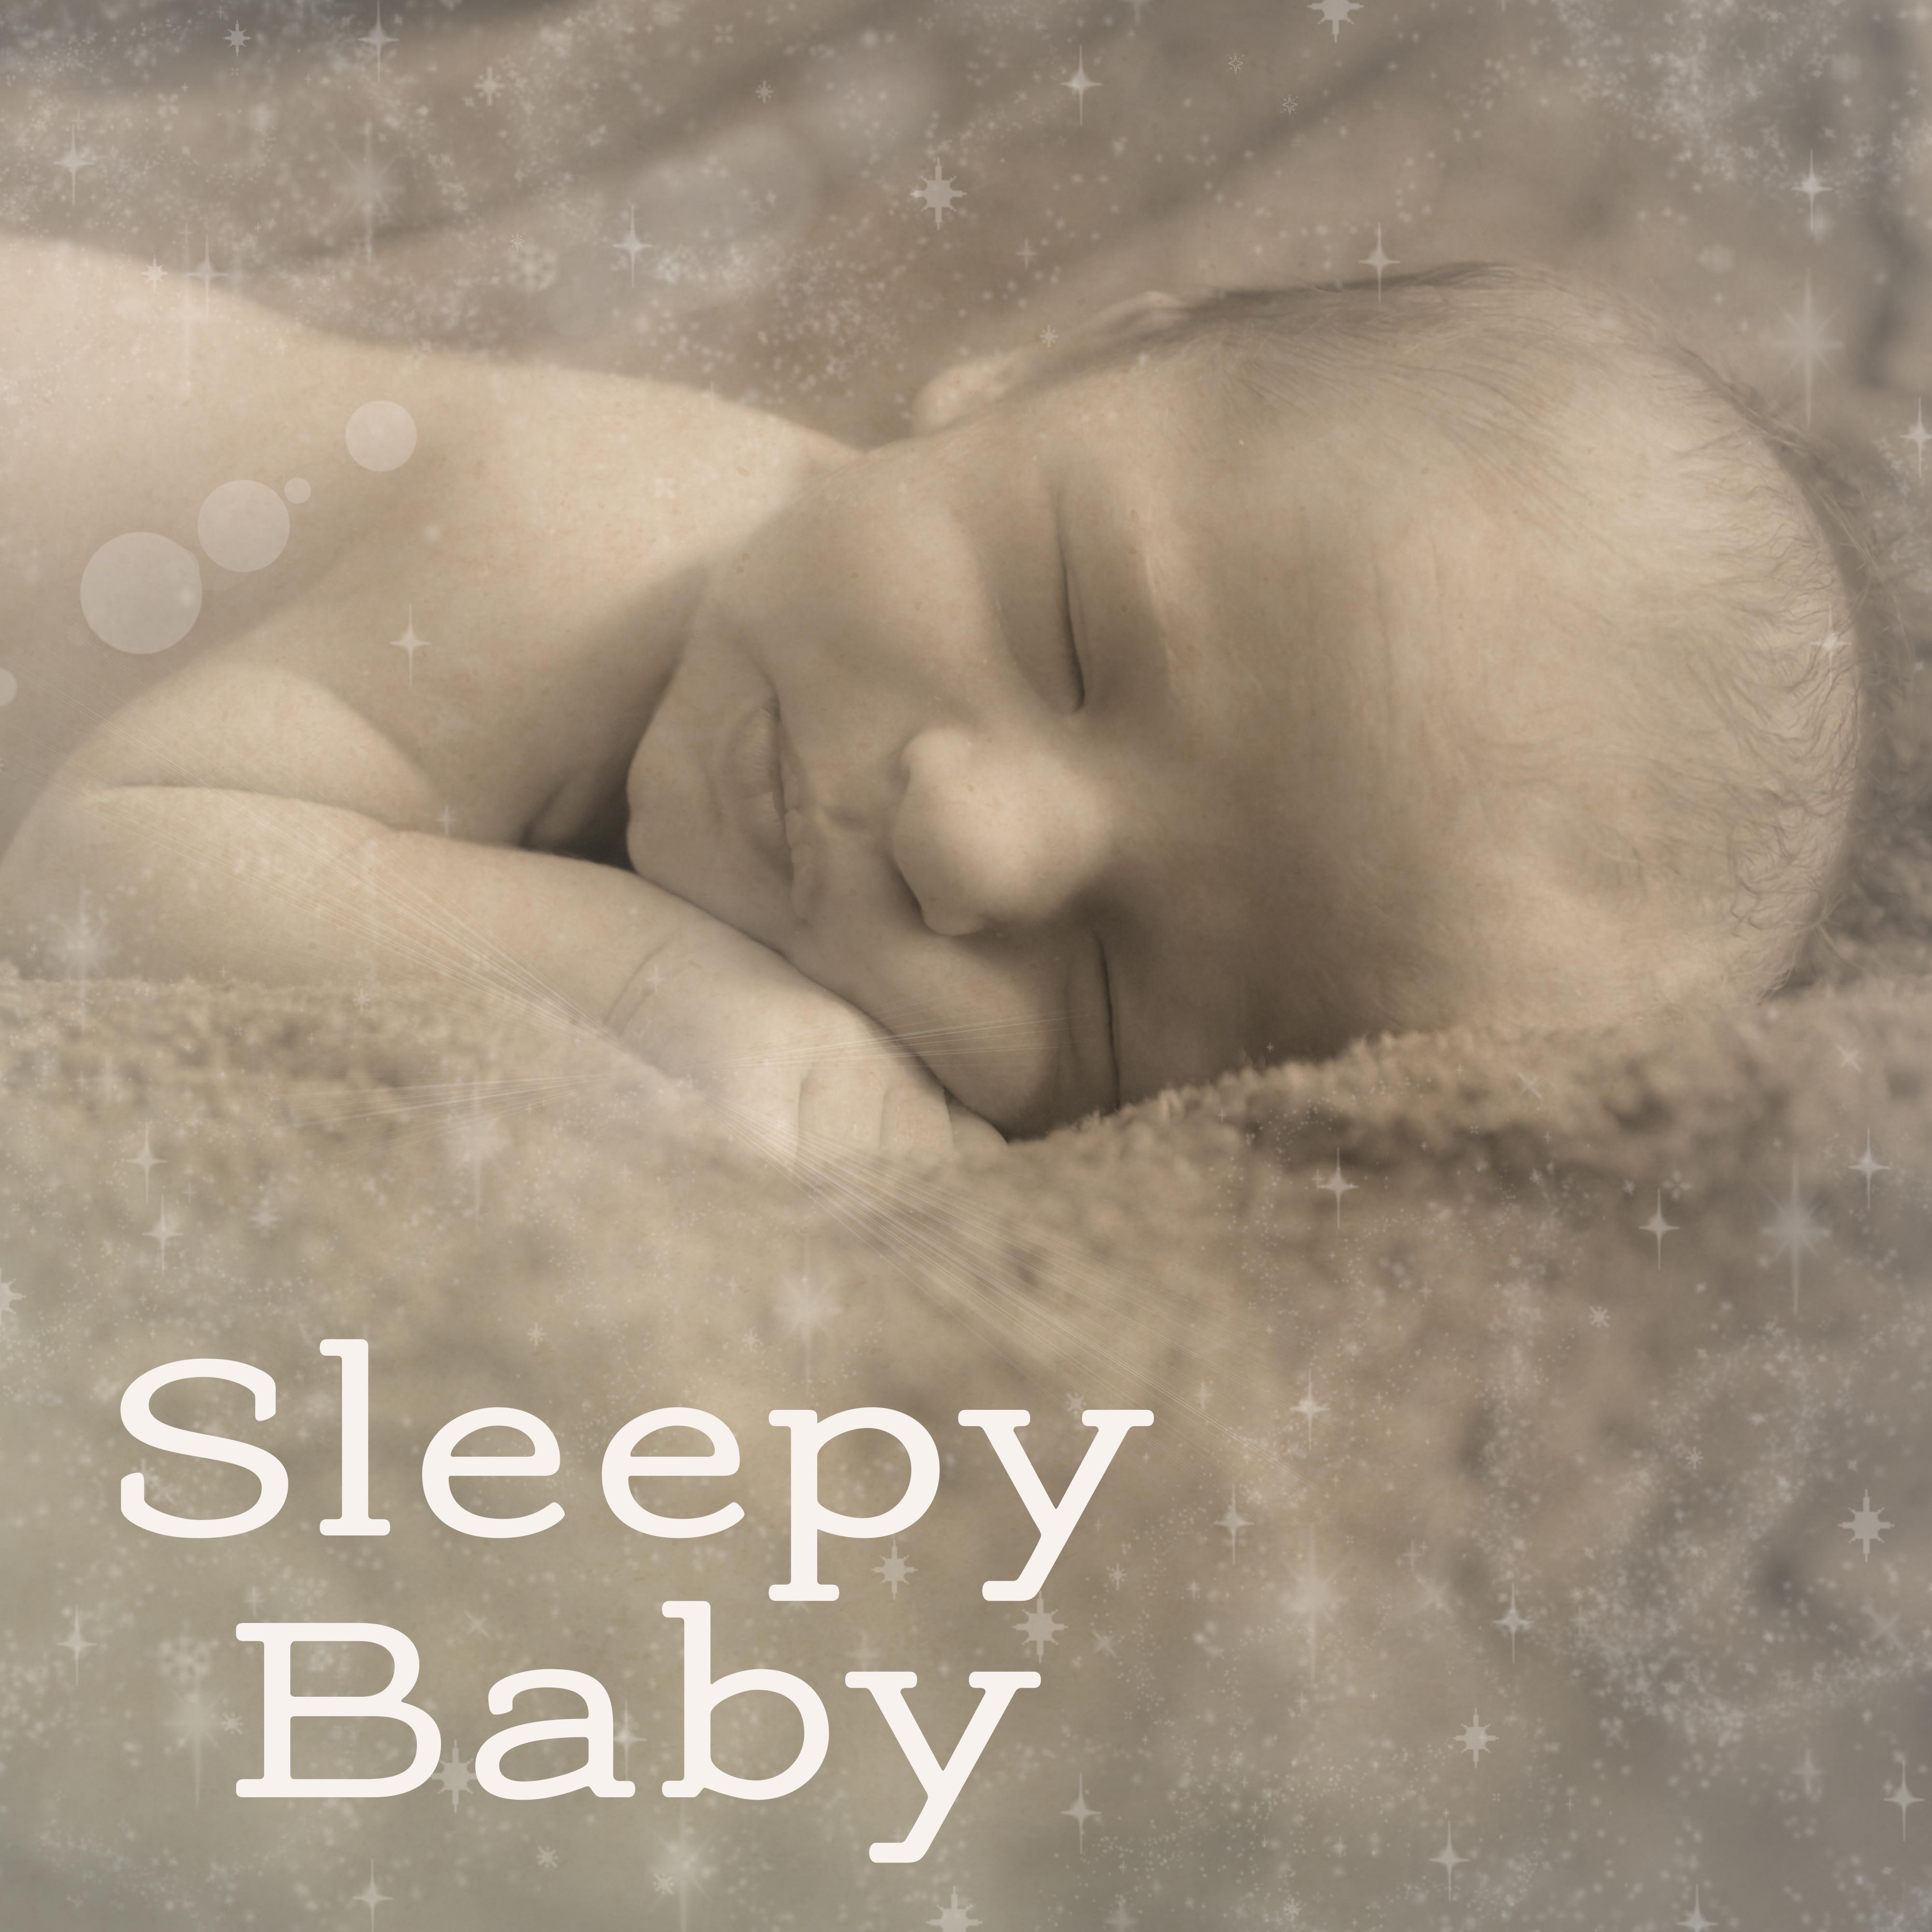 Sleepy Baby  Relaxing Lullabies for Baby, Stress Relief, Sweet Dreams, Cradle Songs, Soothing Nature Sounds at Goodnight, Baby Music